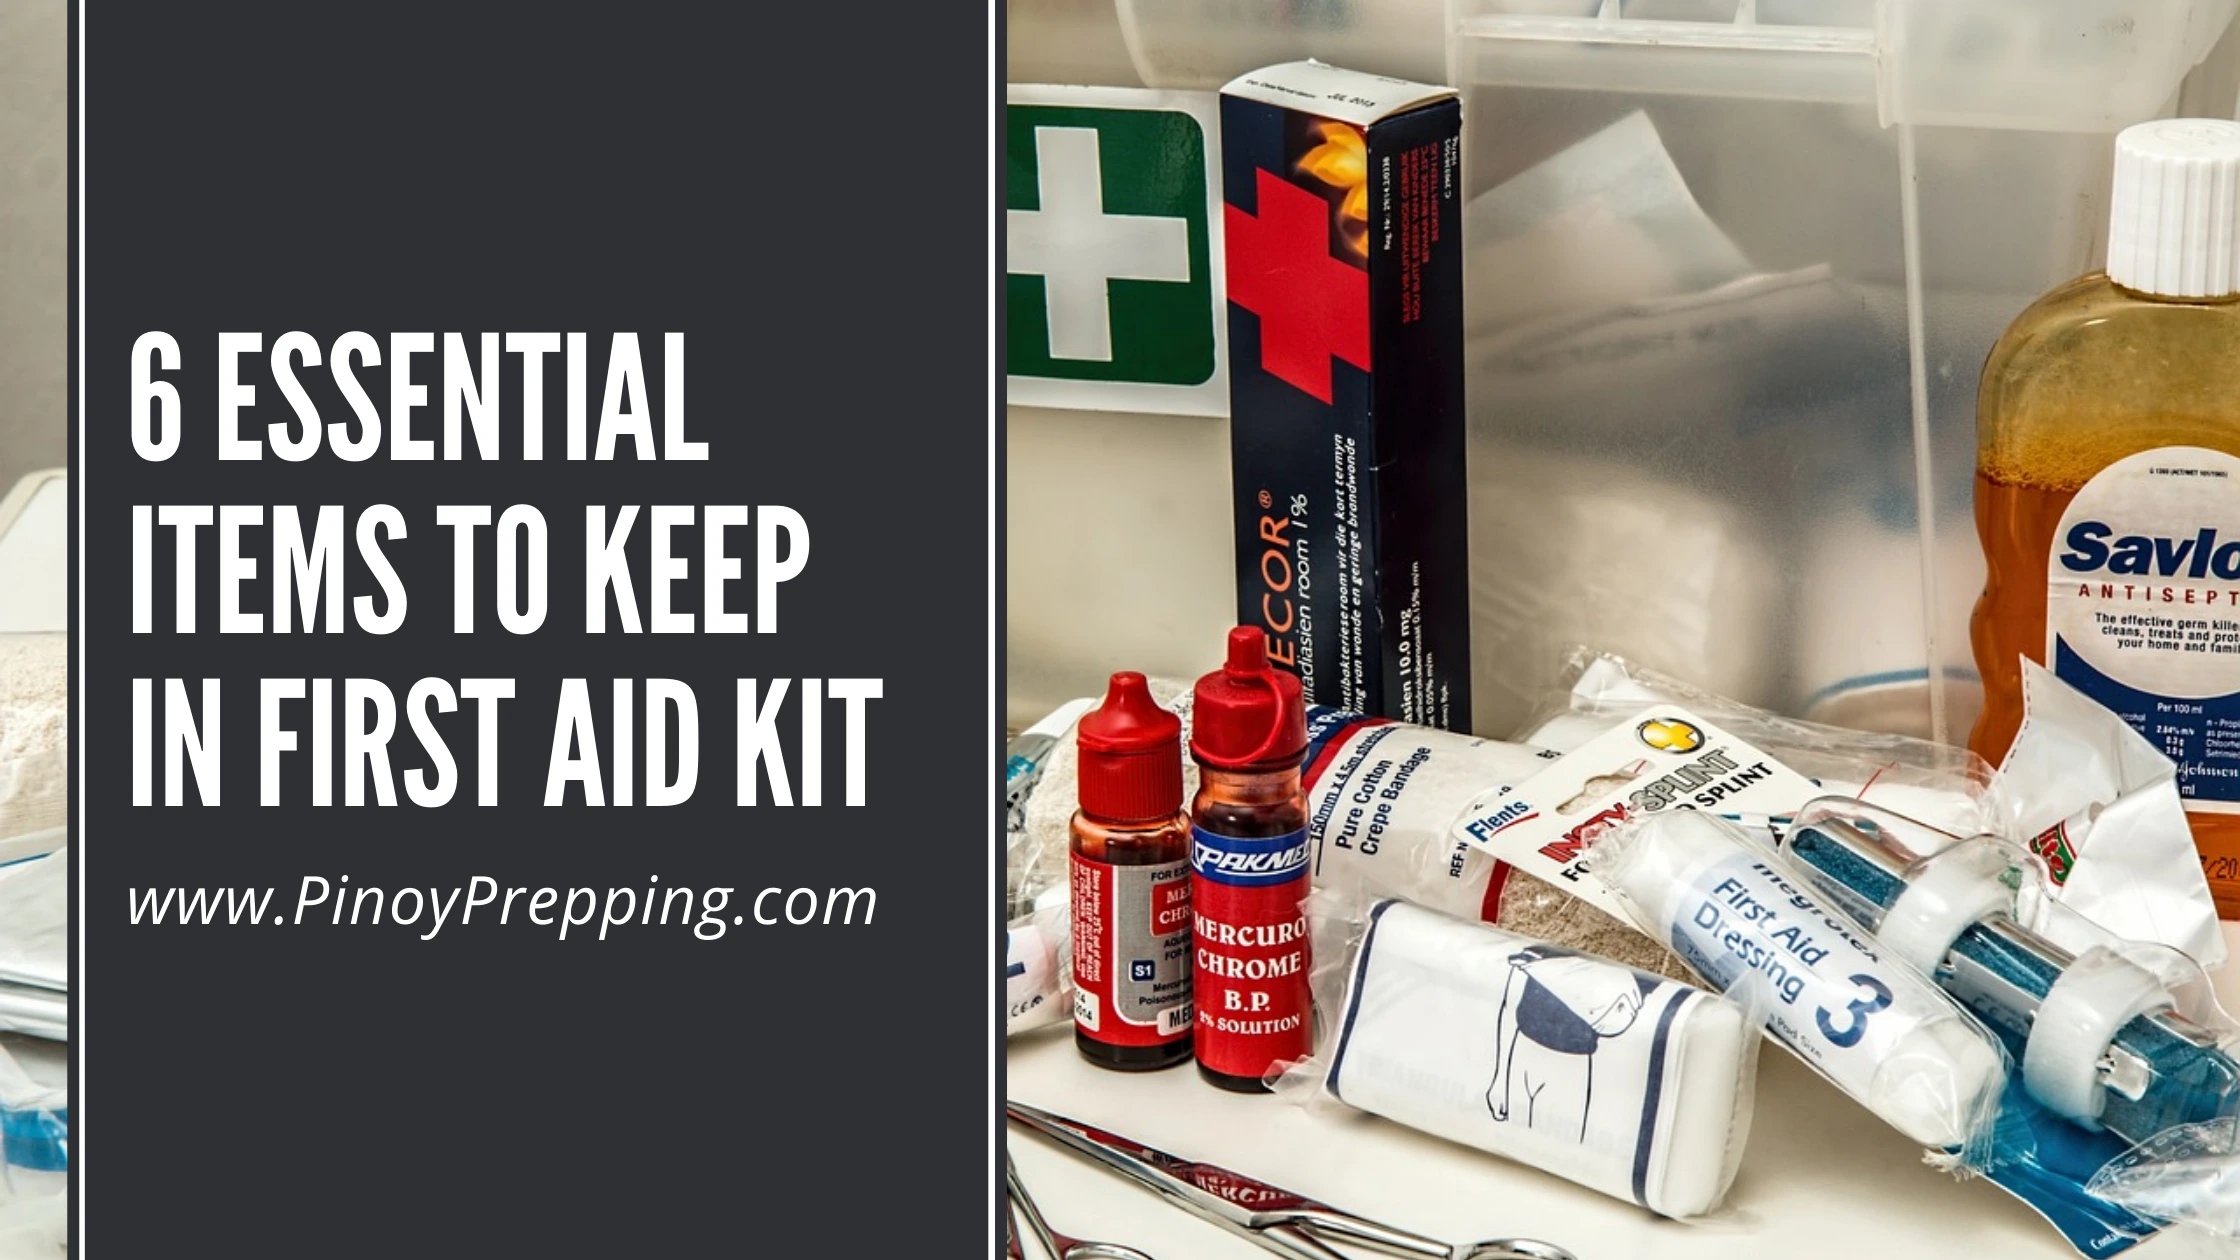 Read on to discover the essential items that should be a part of every first aid kit.